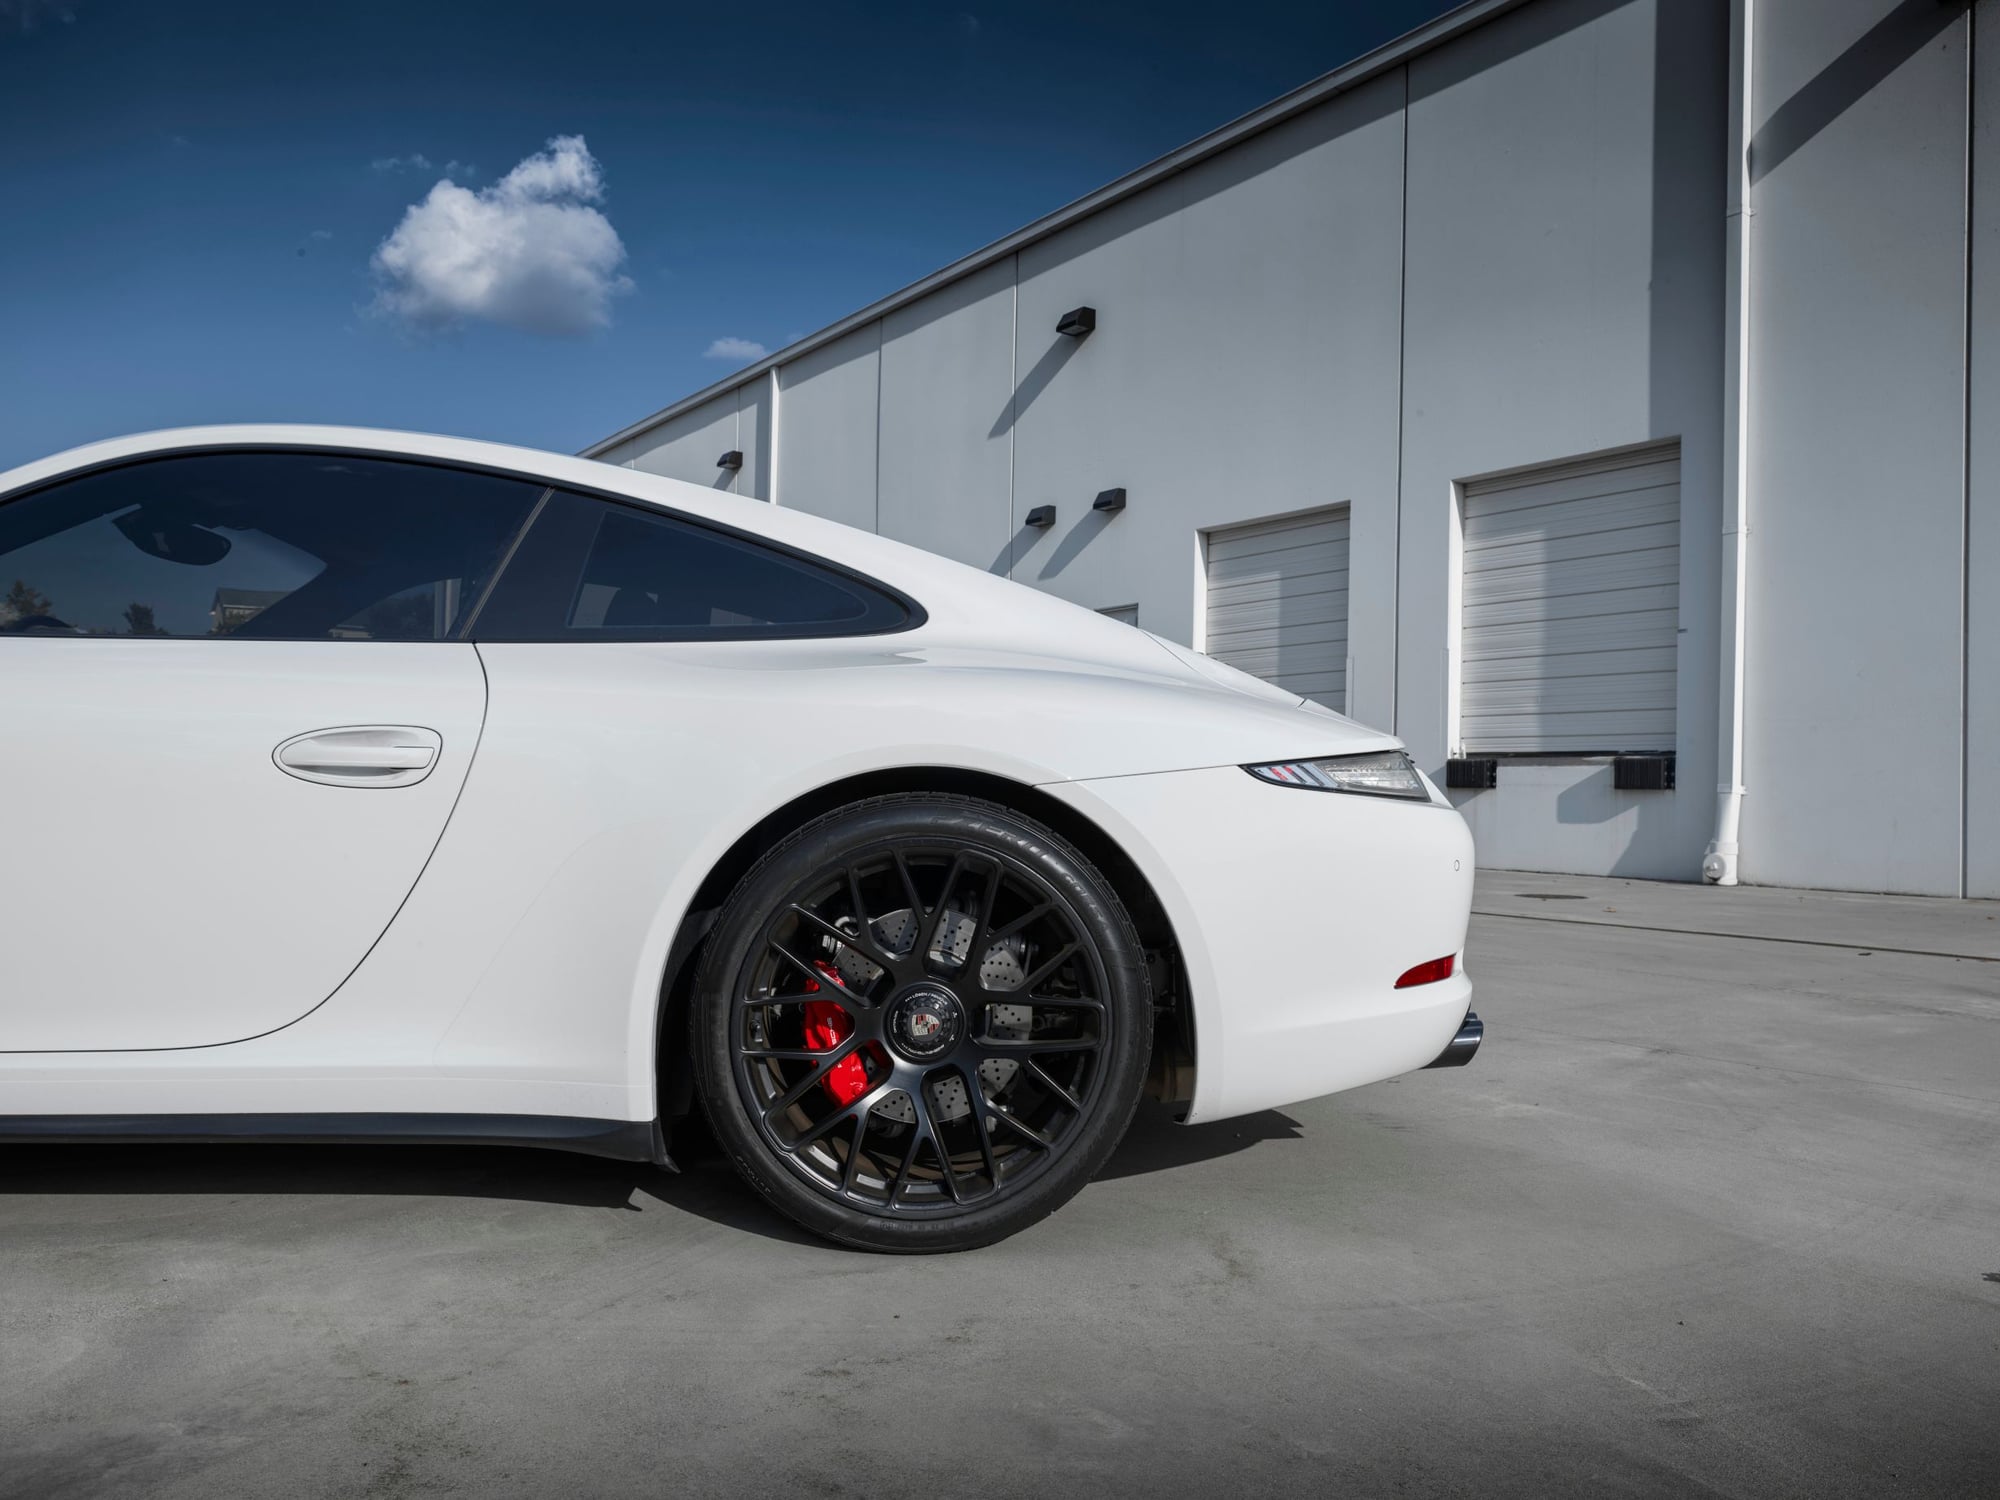 2015 Porsche 911 - 2015 911 991.1 GTS Coupe PDK White/Black 11K Miles with WARRANTY til 7/22 - Used - VIN WP0AB2A96FS125847 - 11,000 Miles - 6 cyl - 2WD - Automatic - Coupe - White - Mclean, VA 22102, United States